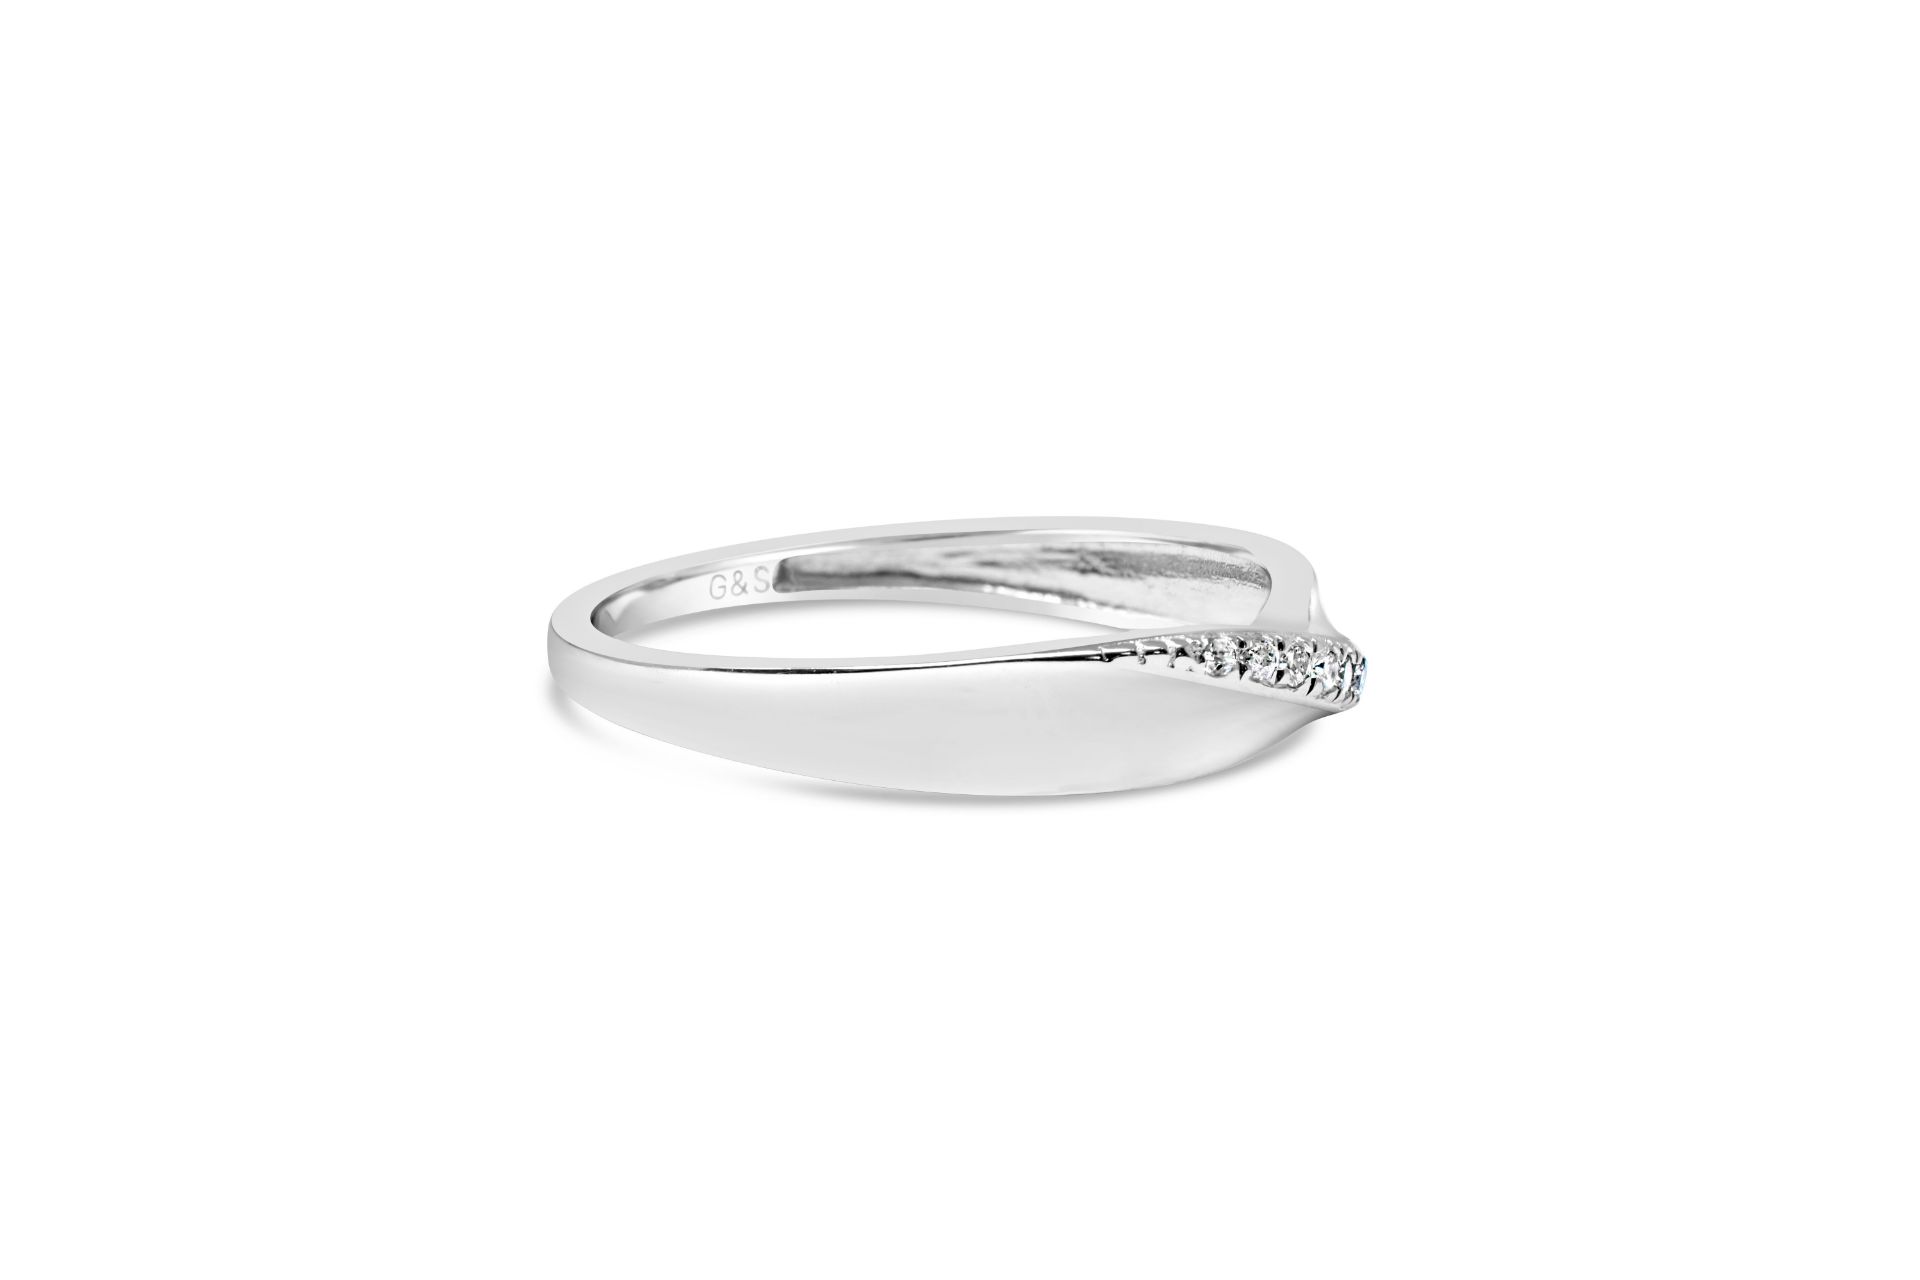 9CT White Gold Diamond Band with Twist, Metal 9ct - Image 3 of 3